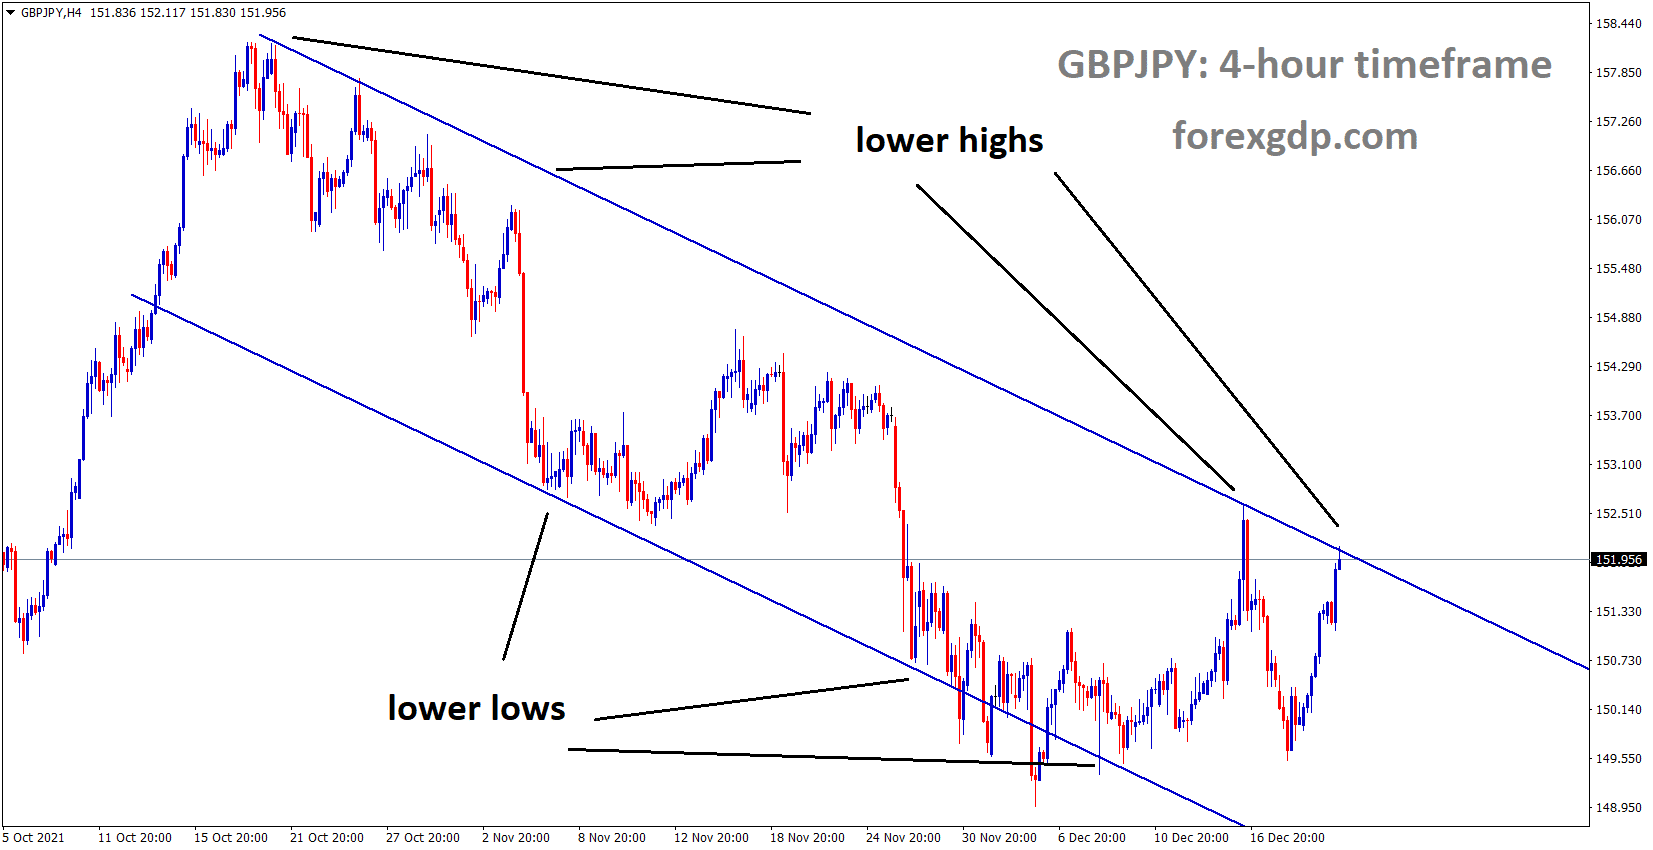 GBPJPY is moving in the Descending channel and the market has reached the lower high area of the channel